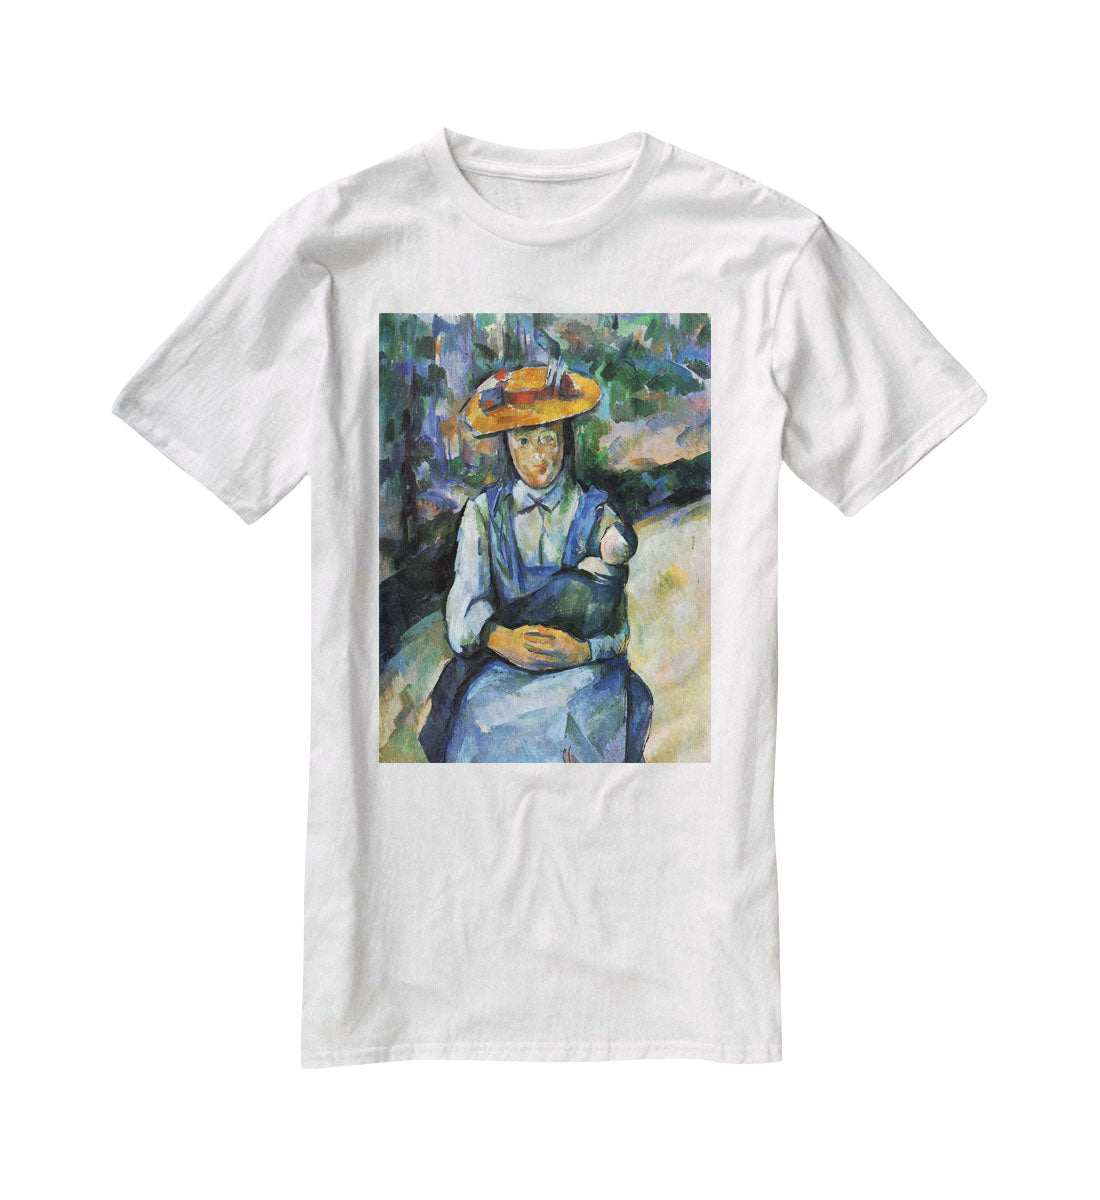 Girl with Doll by Cezanne T-Shirt - Canvas Art Rocks - 5